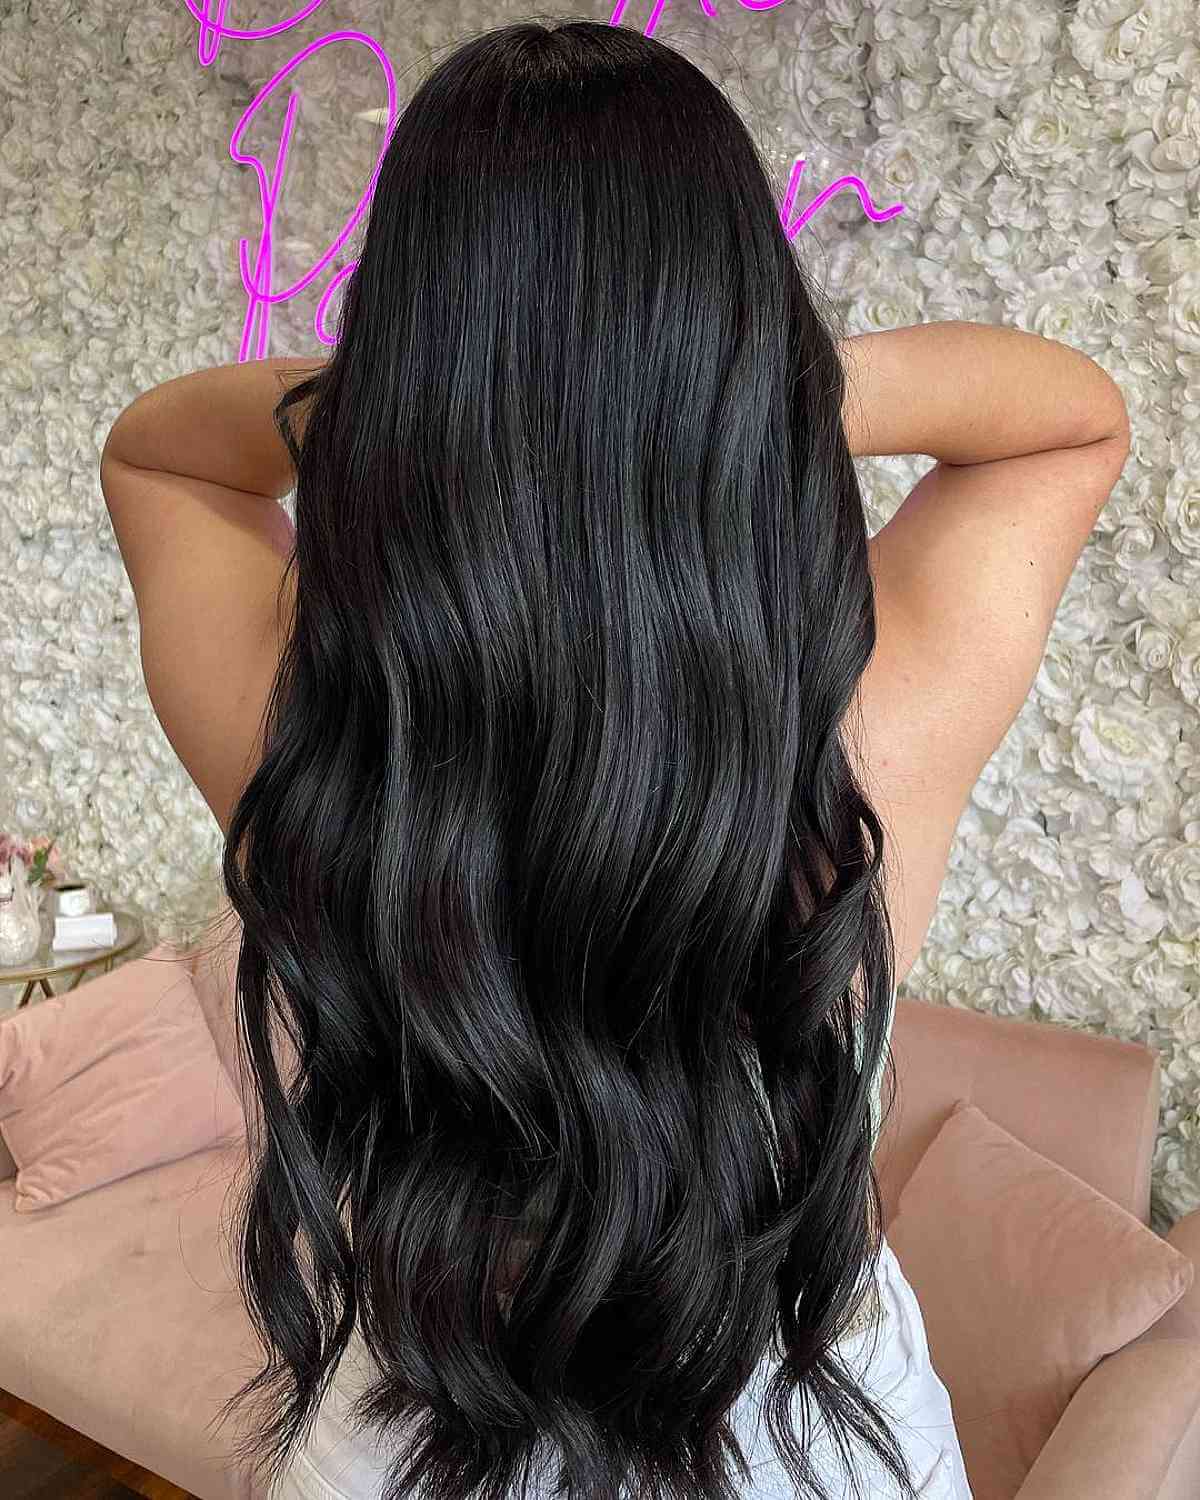 Long and Shiny Black Thick Hair